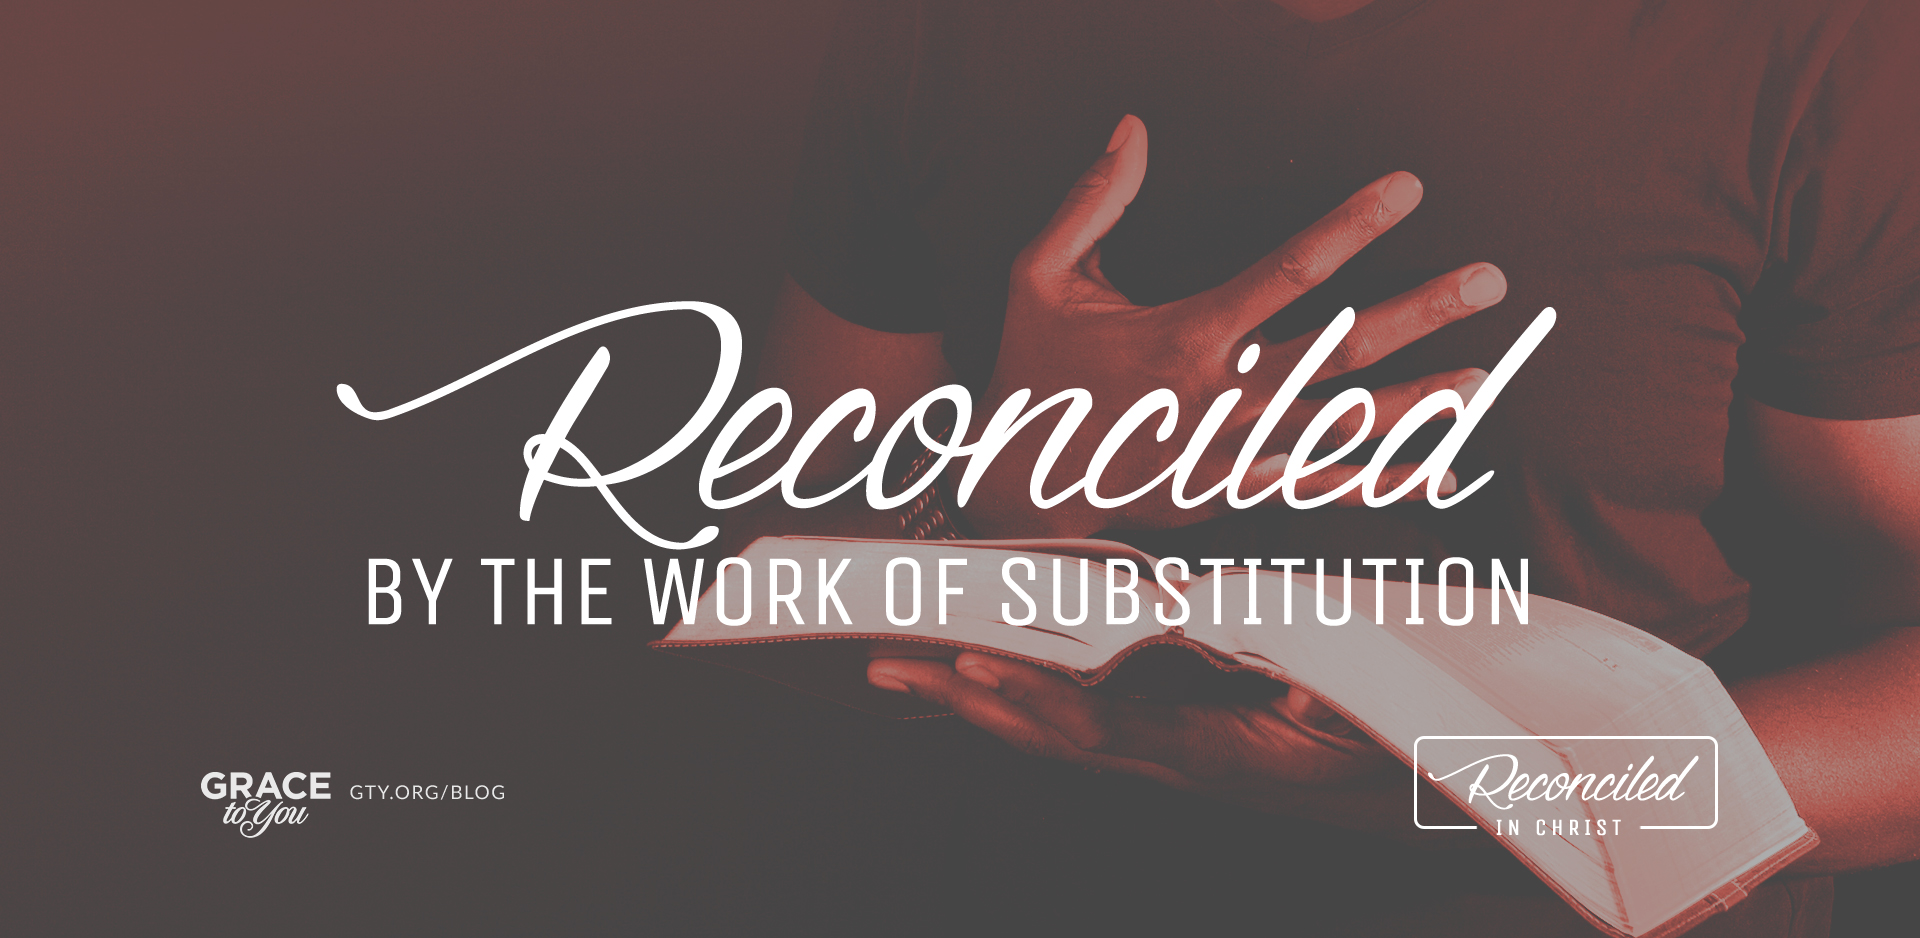 Reconciled by the Work of Substitution